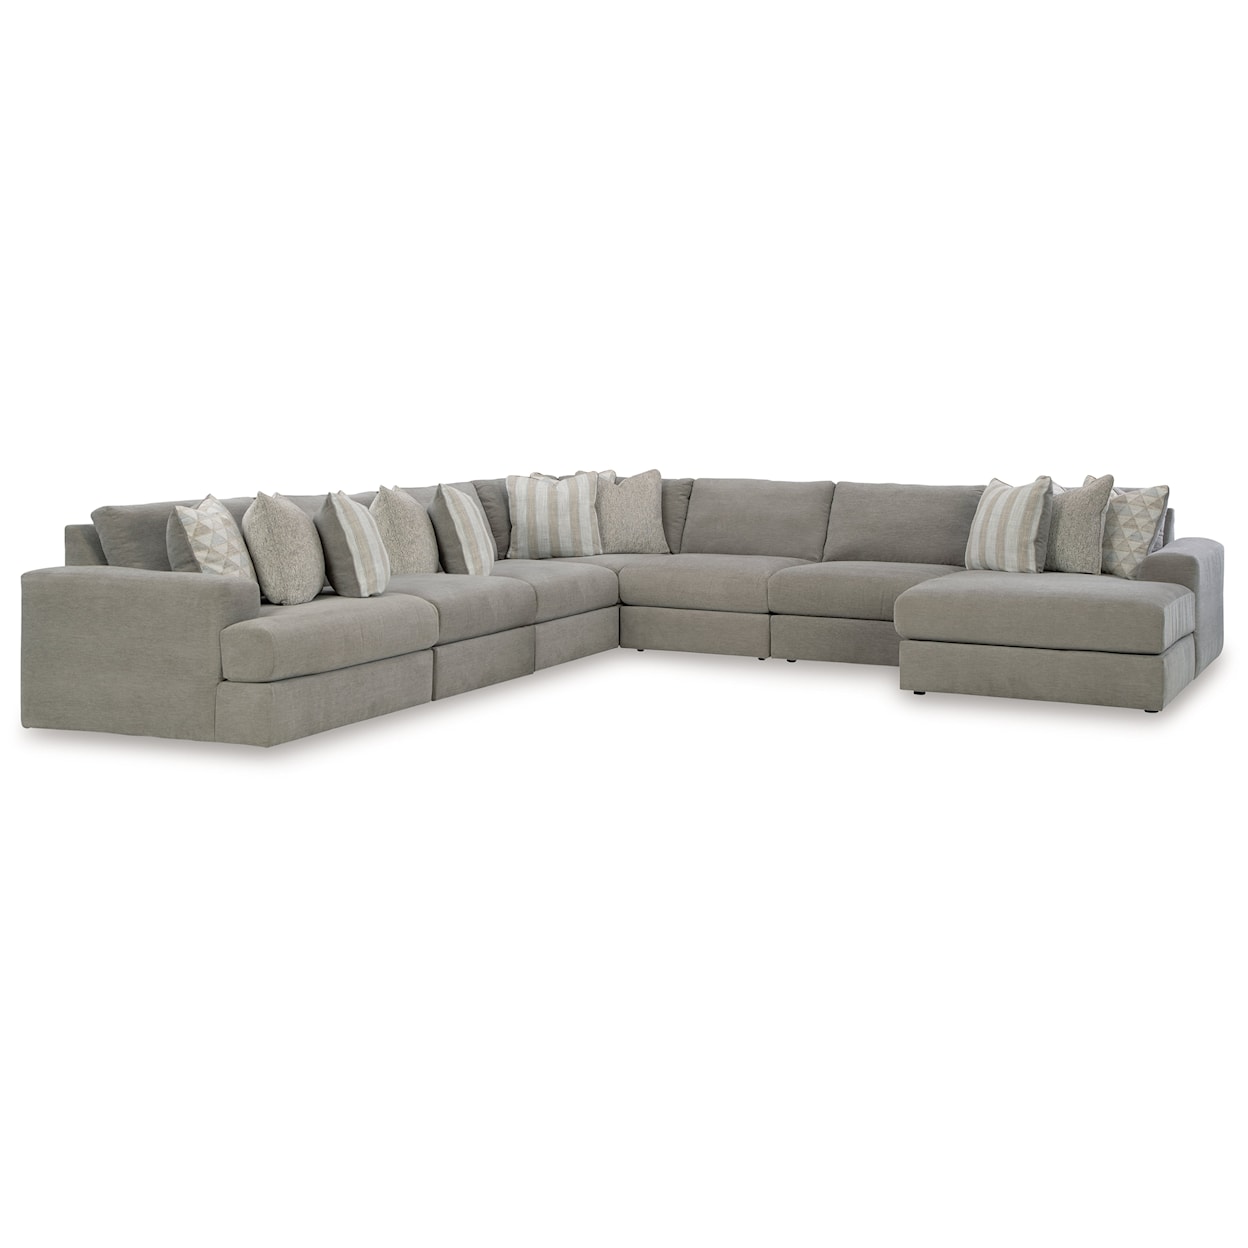 Signature Design by Ashley Avaliyah 7-Piece Sectional With Chaise